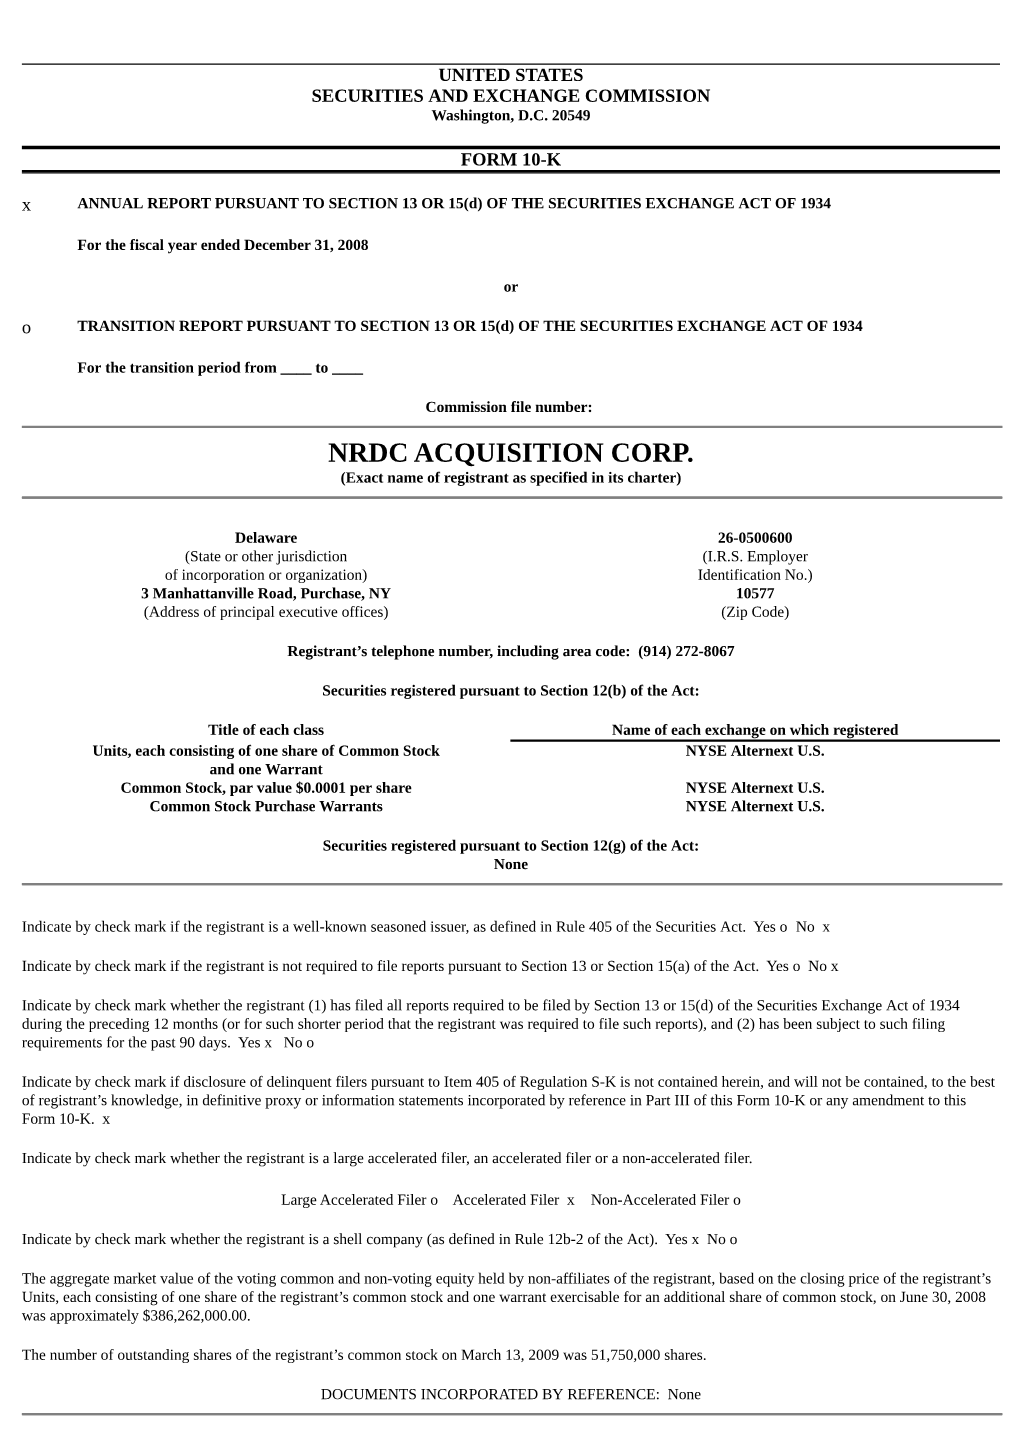 NRDC ACQUISITION CORP. (Exact Name of Registrant As Specified in Its Charter)